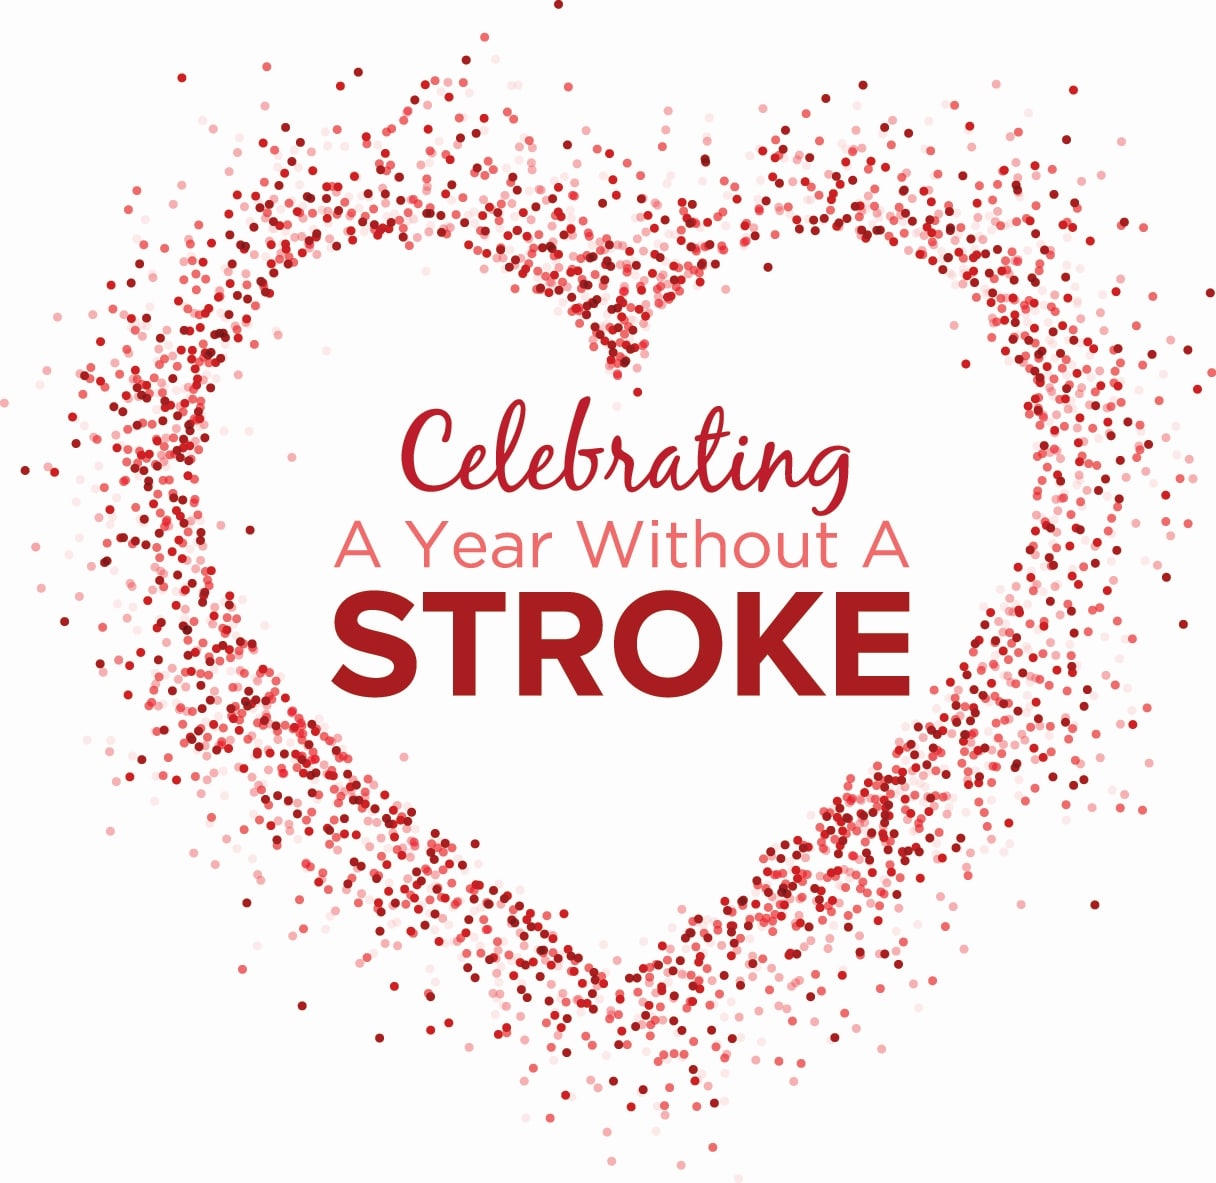 Wall Street Journal Features Ad Celebrating a Year Without a Stroke